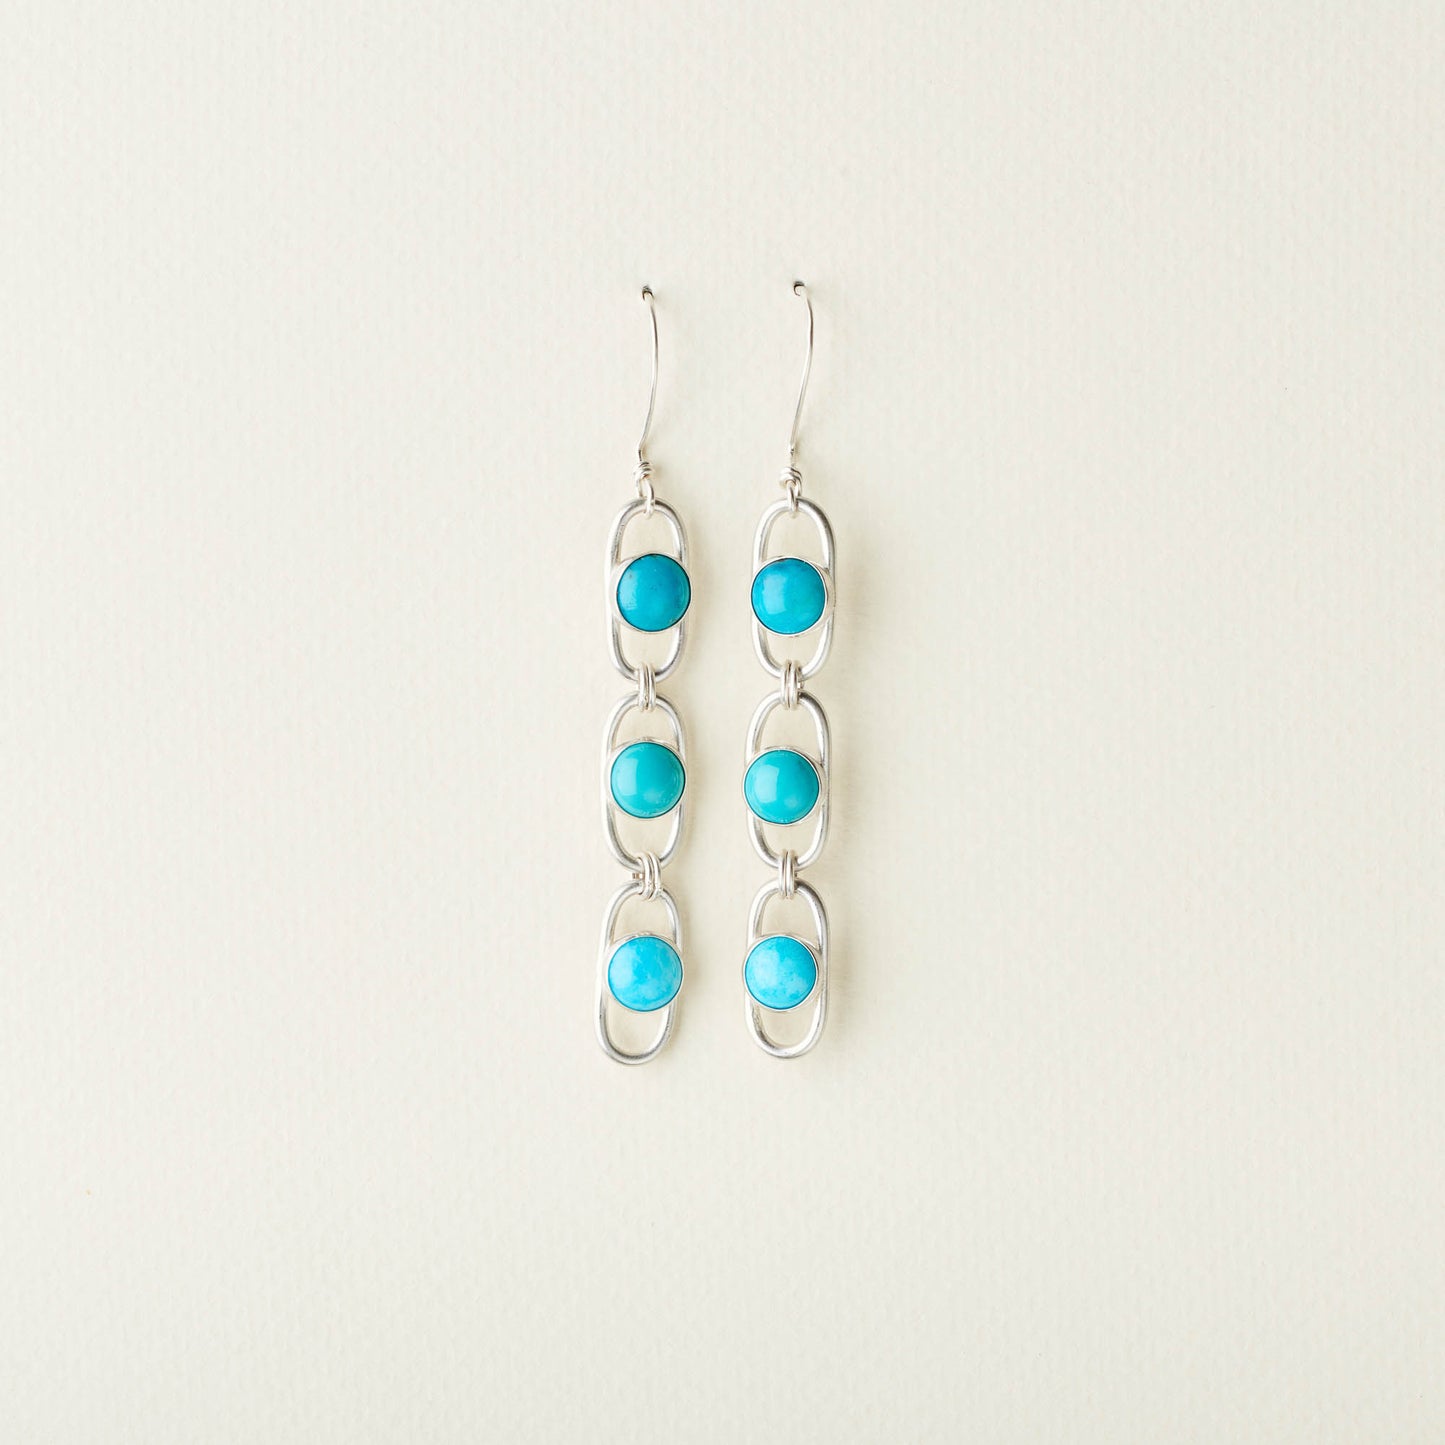 Trickle Earrings :: Turquoise Trio